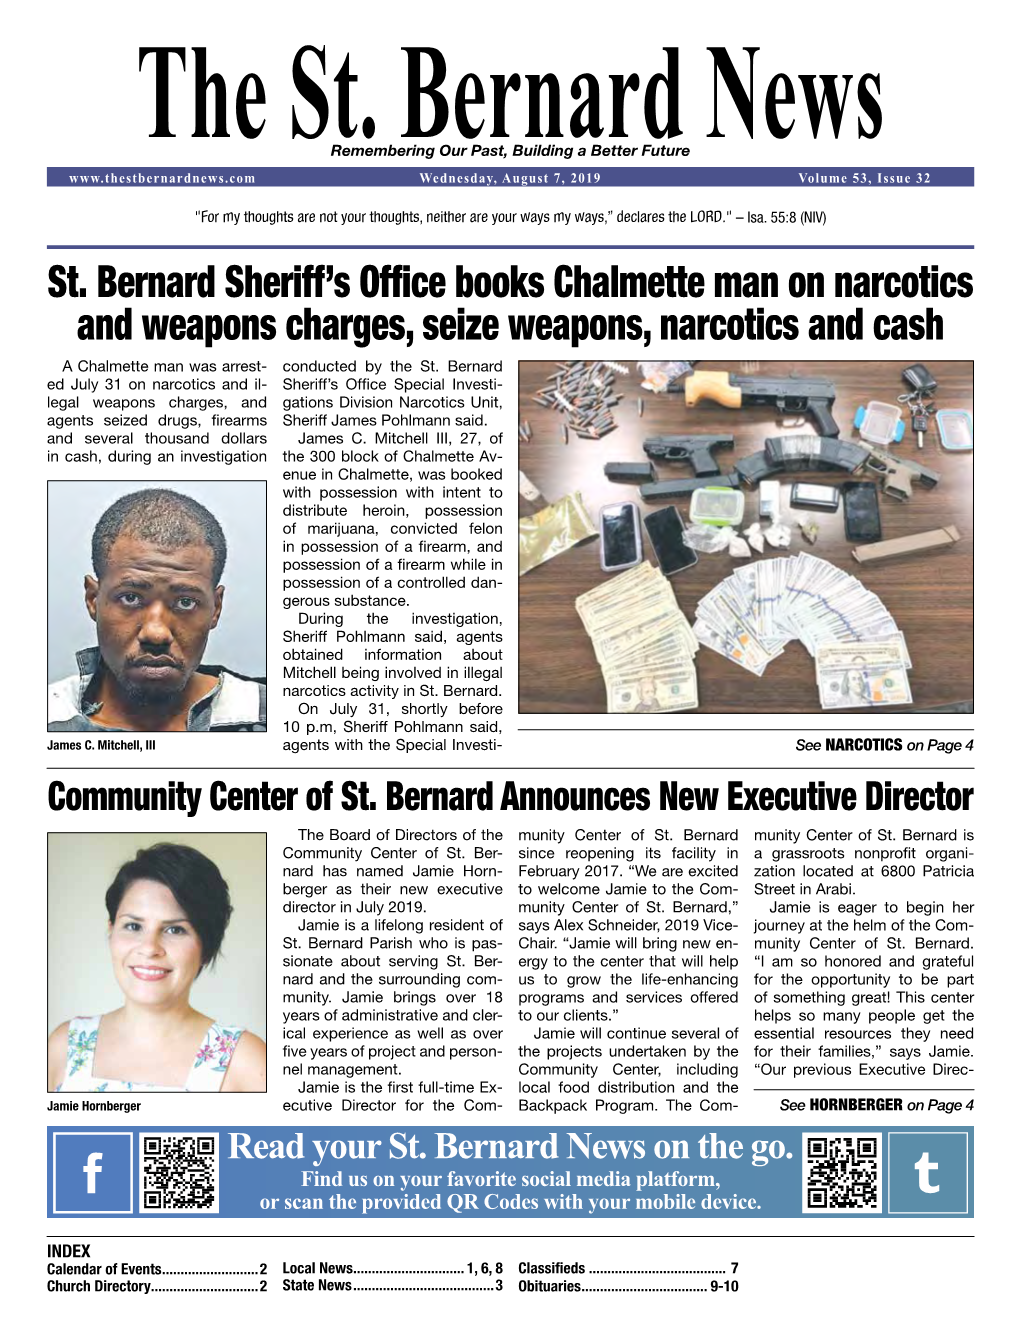 St. Bernard Sheriff's Office Books Chalmette Man on Narcotics And